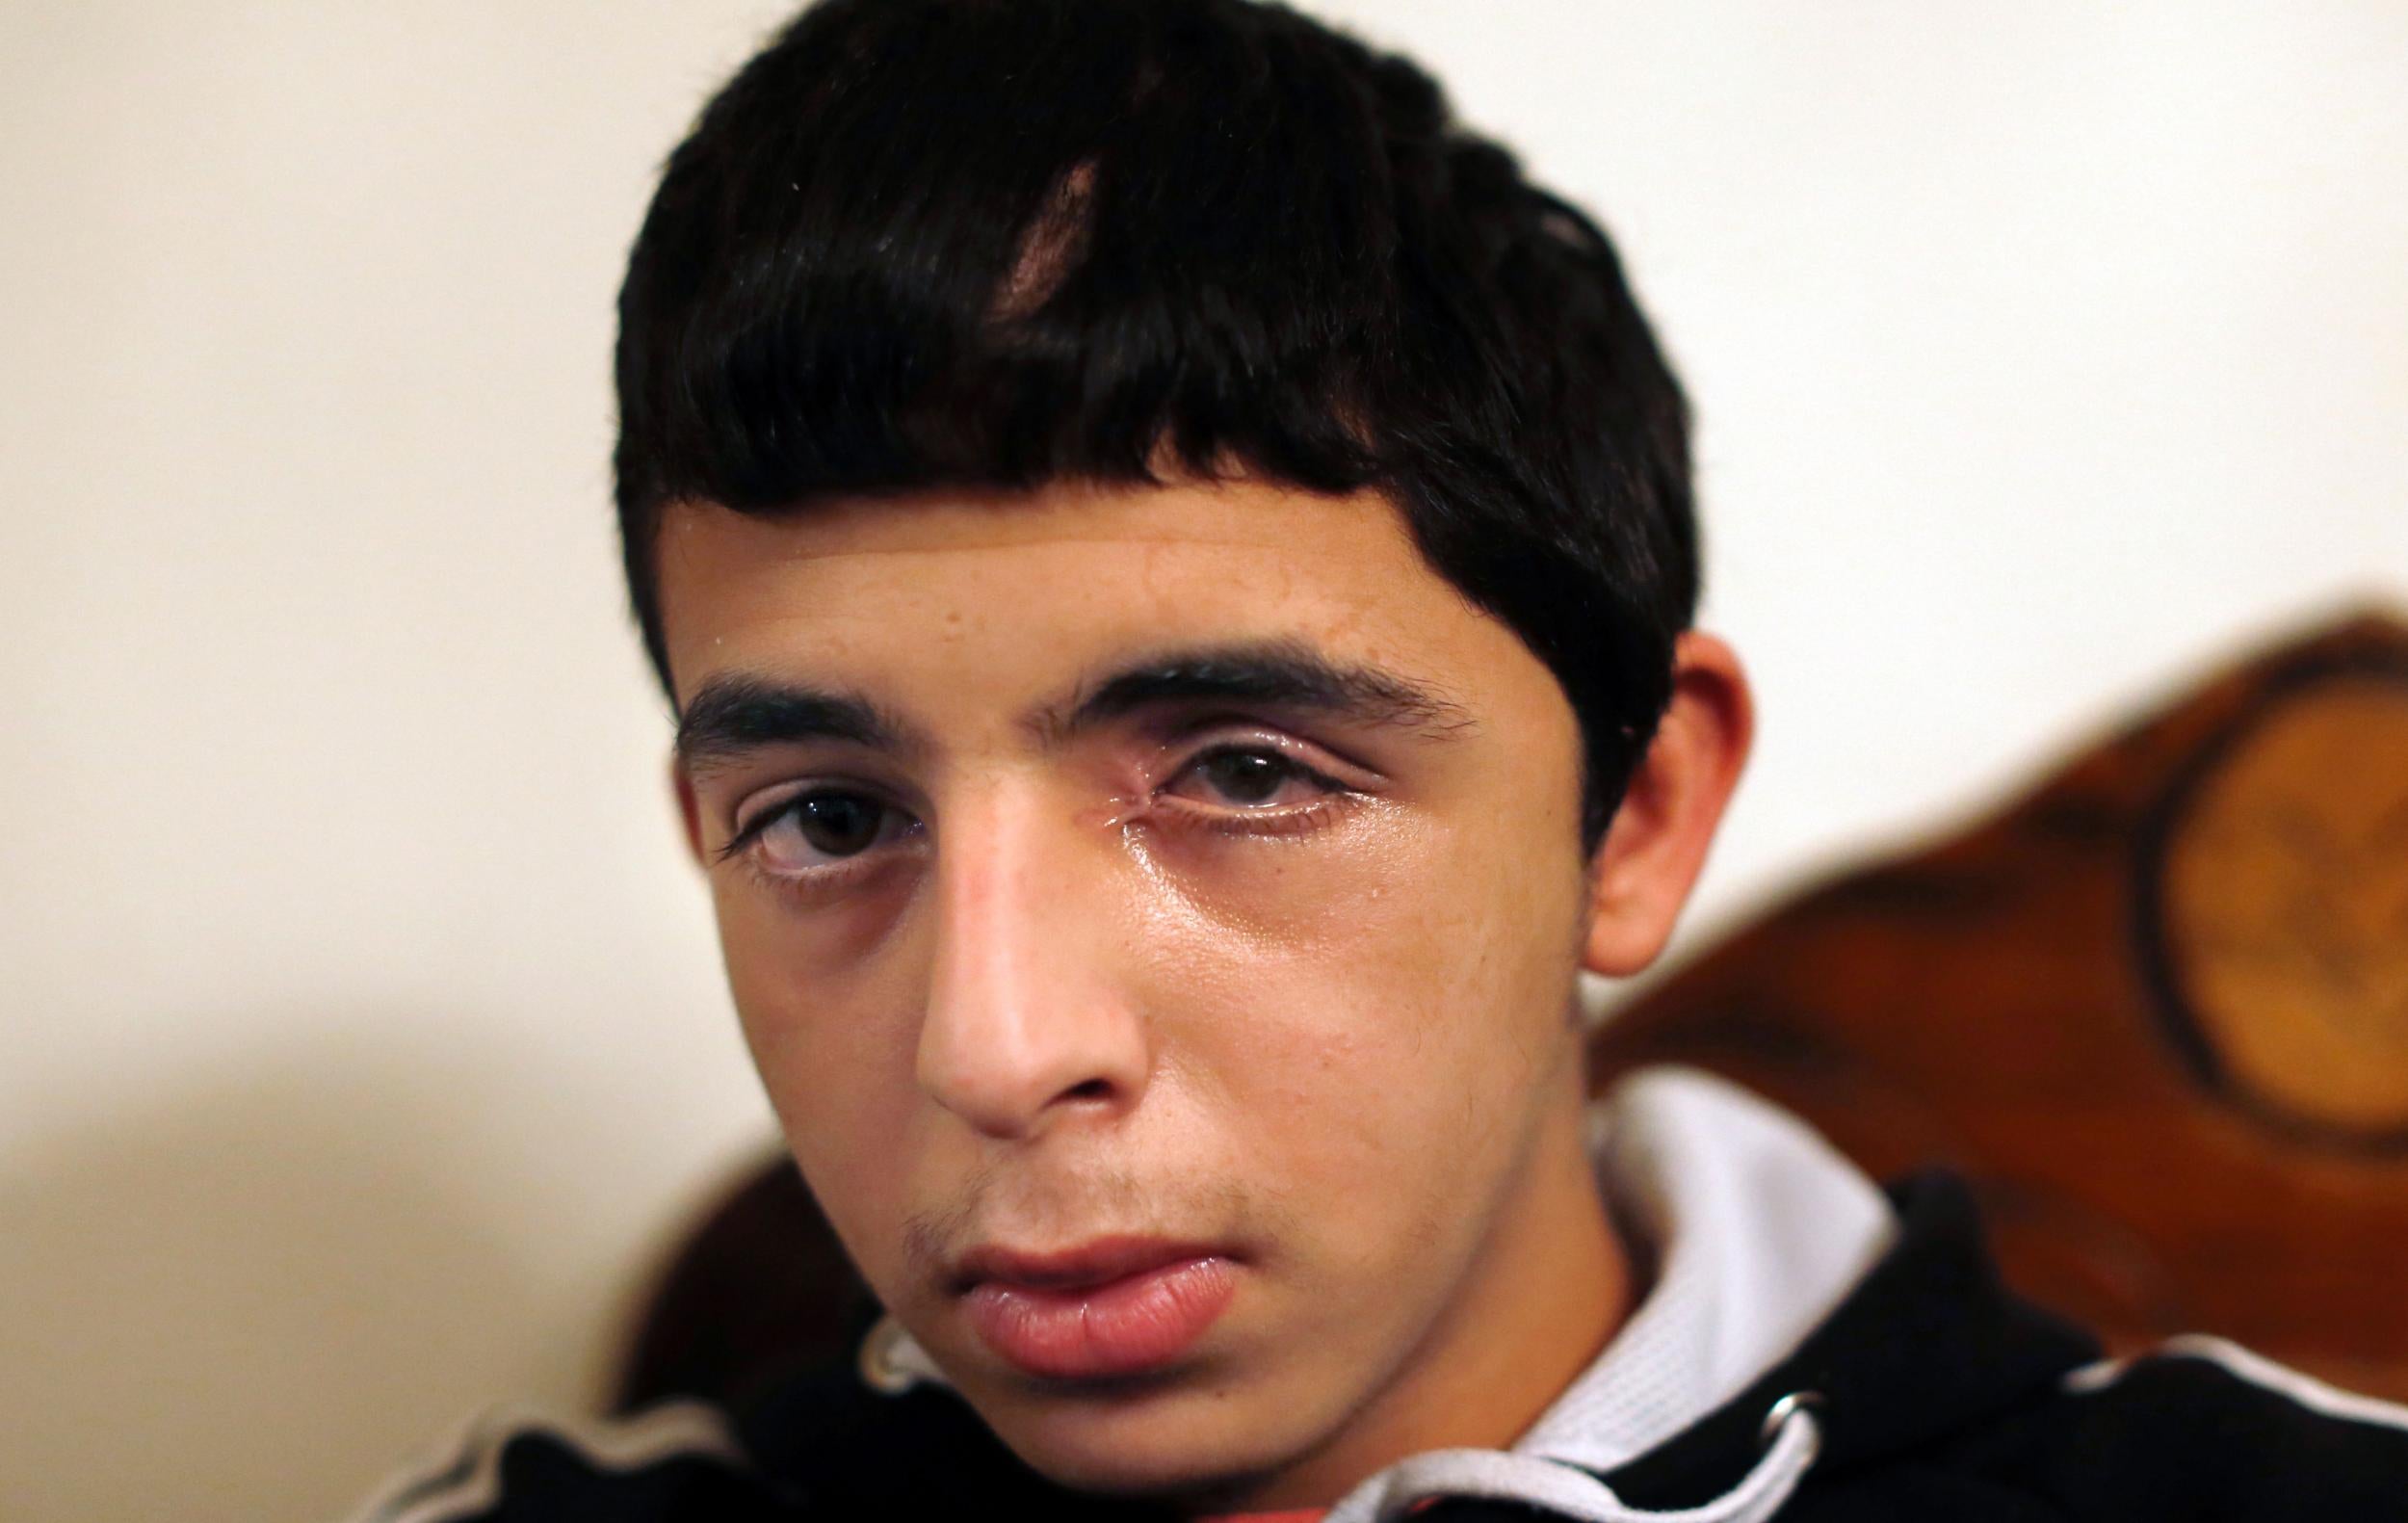 &#13;
Another victim: Khalil al-Kisuani, 15, lost his eye from a bullet last year &#13;